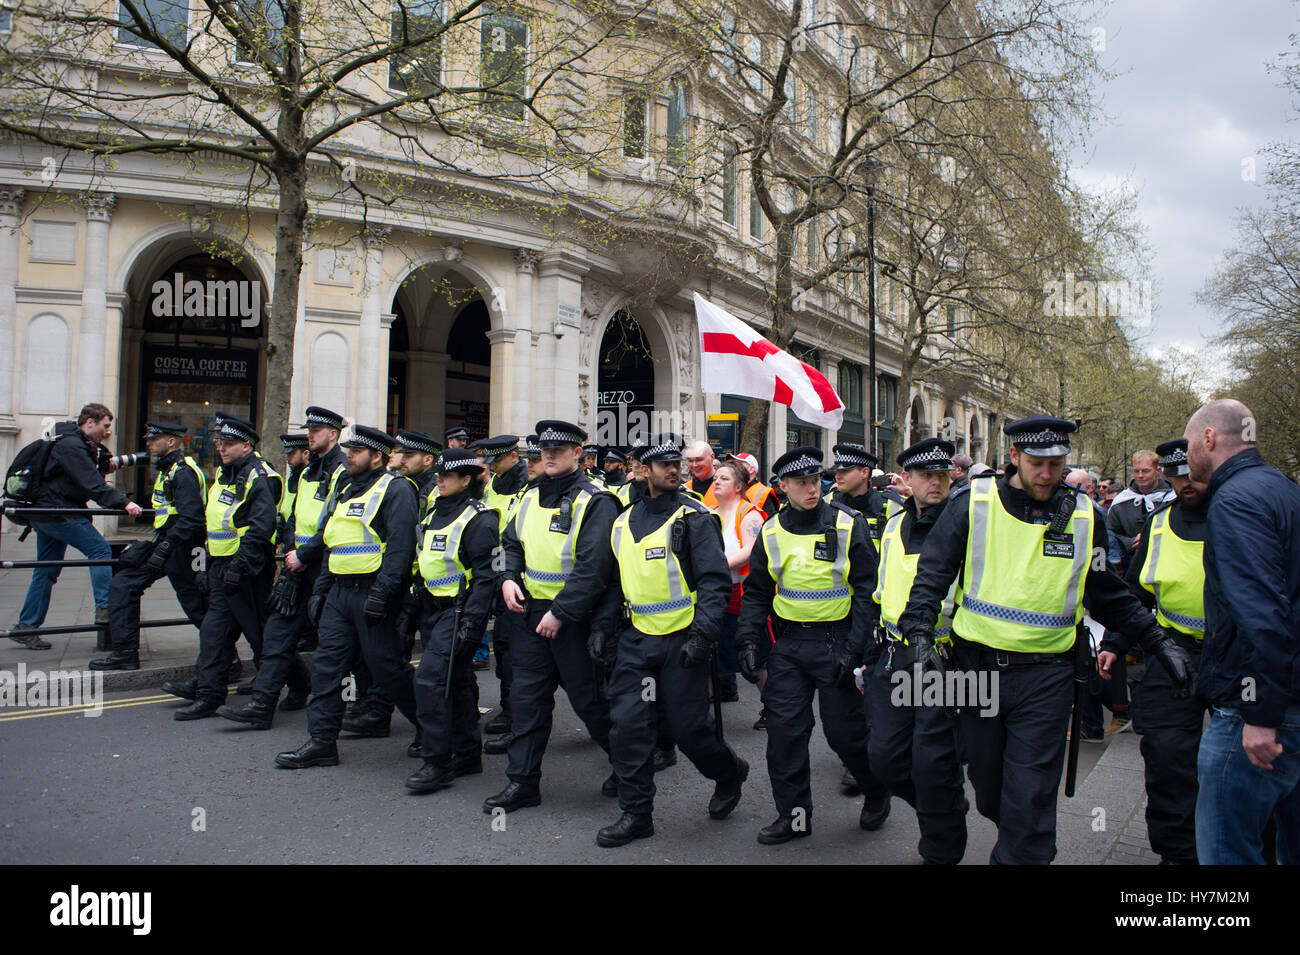 London, UK. 1st April, 2017.  The English Defence League (EDL) and Britain First held a protest march through London. The Britain First group were protesting against terrorism in response to the reason terrorist attack in London on March the 22nd 2017.  Several police escorted the small crowd of demonstrators. Andrew Steven Graham/Alamy Live News Stock Photo